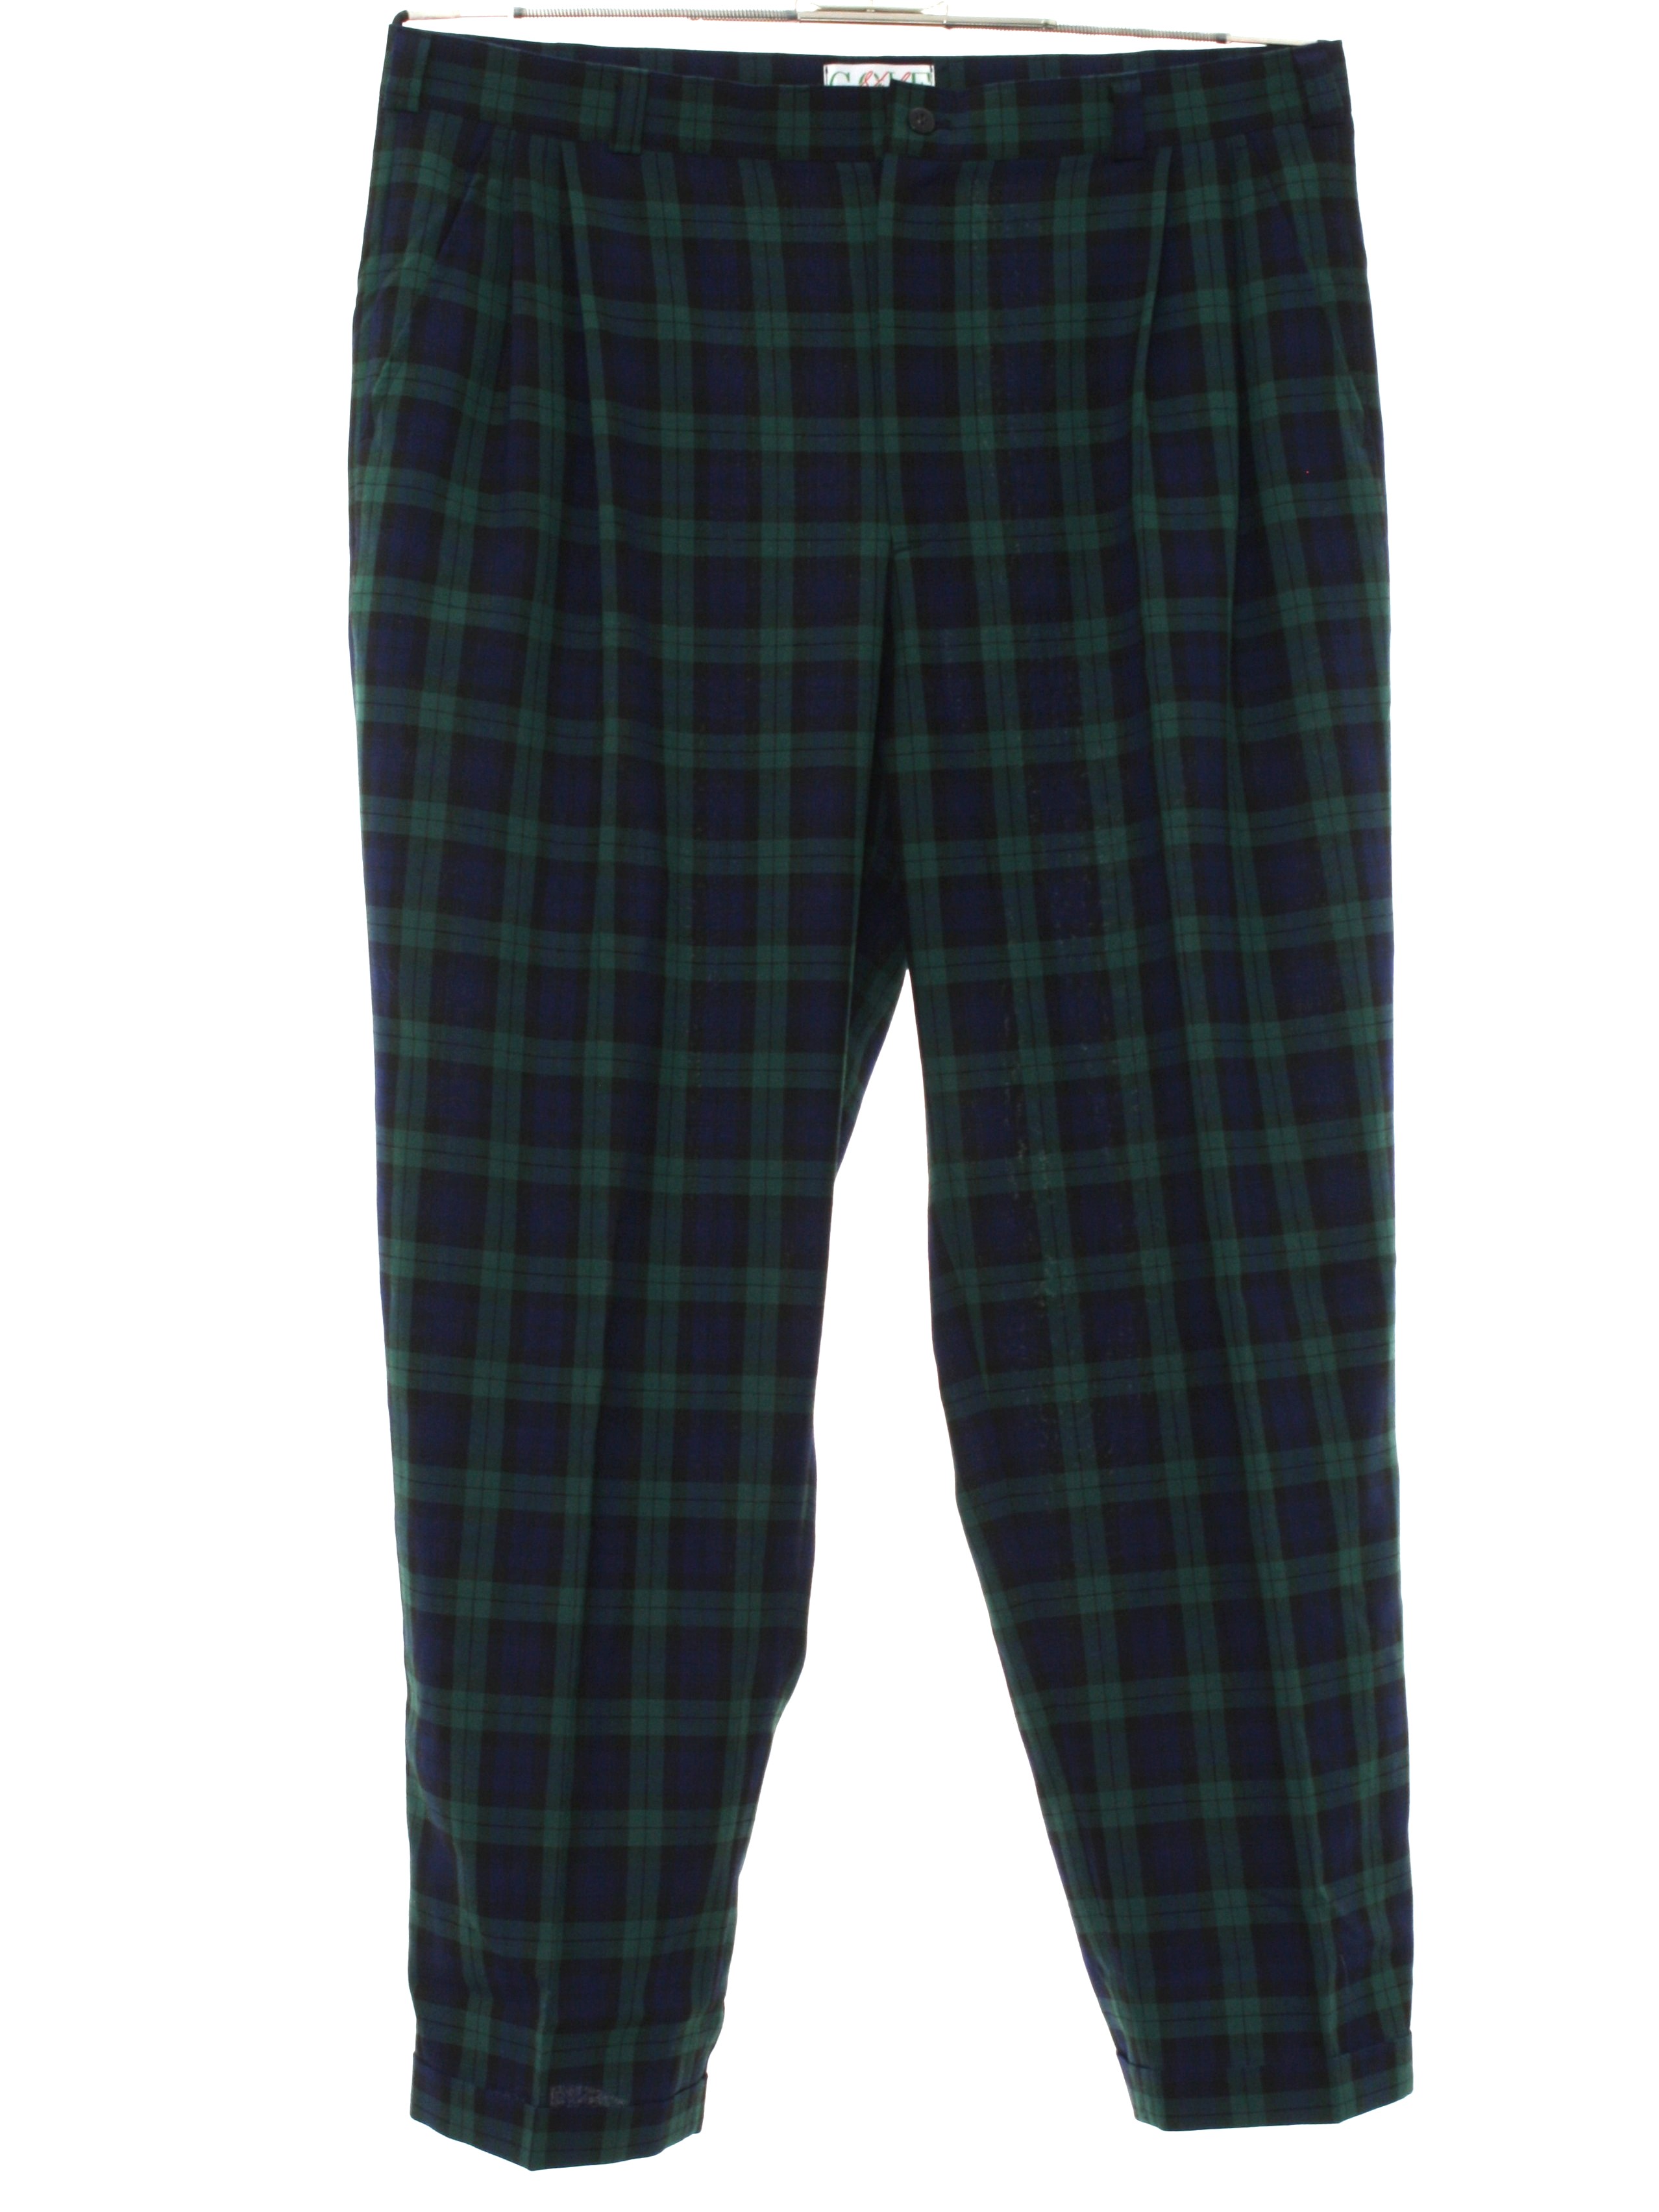 Retro Eighties Pants: 80s -Golf Style- Mens navy blue, green and black ...